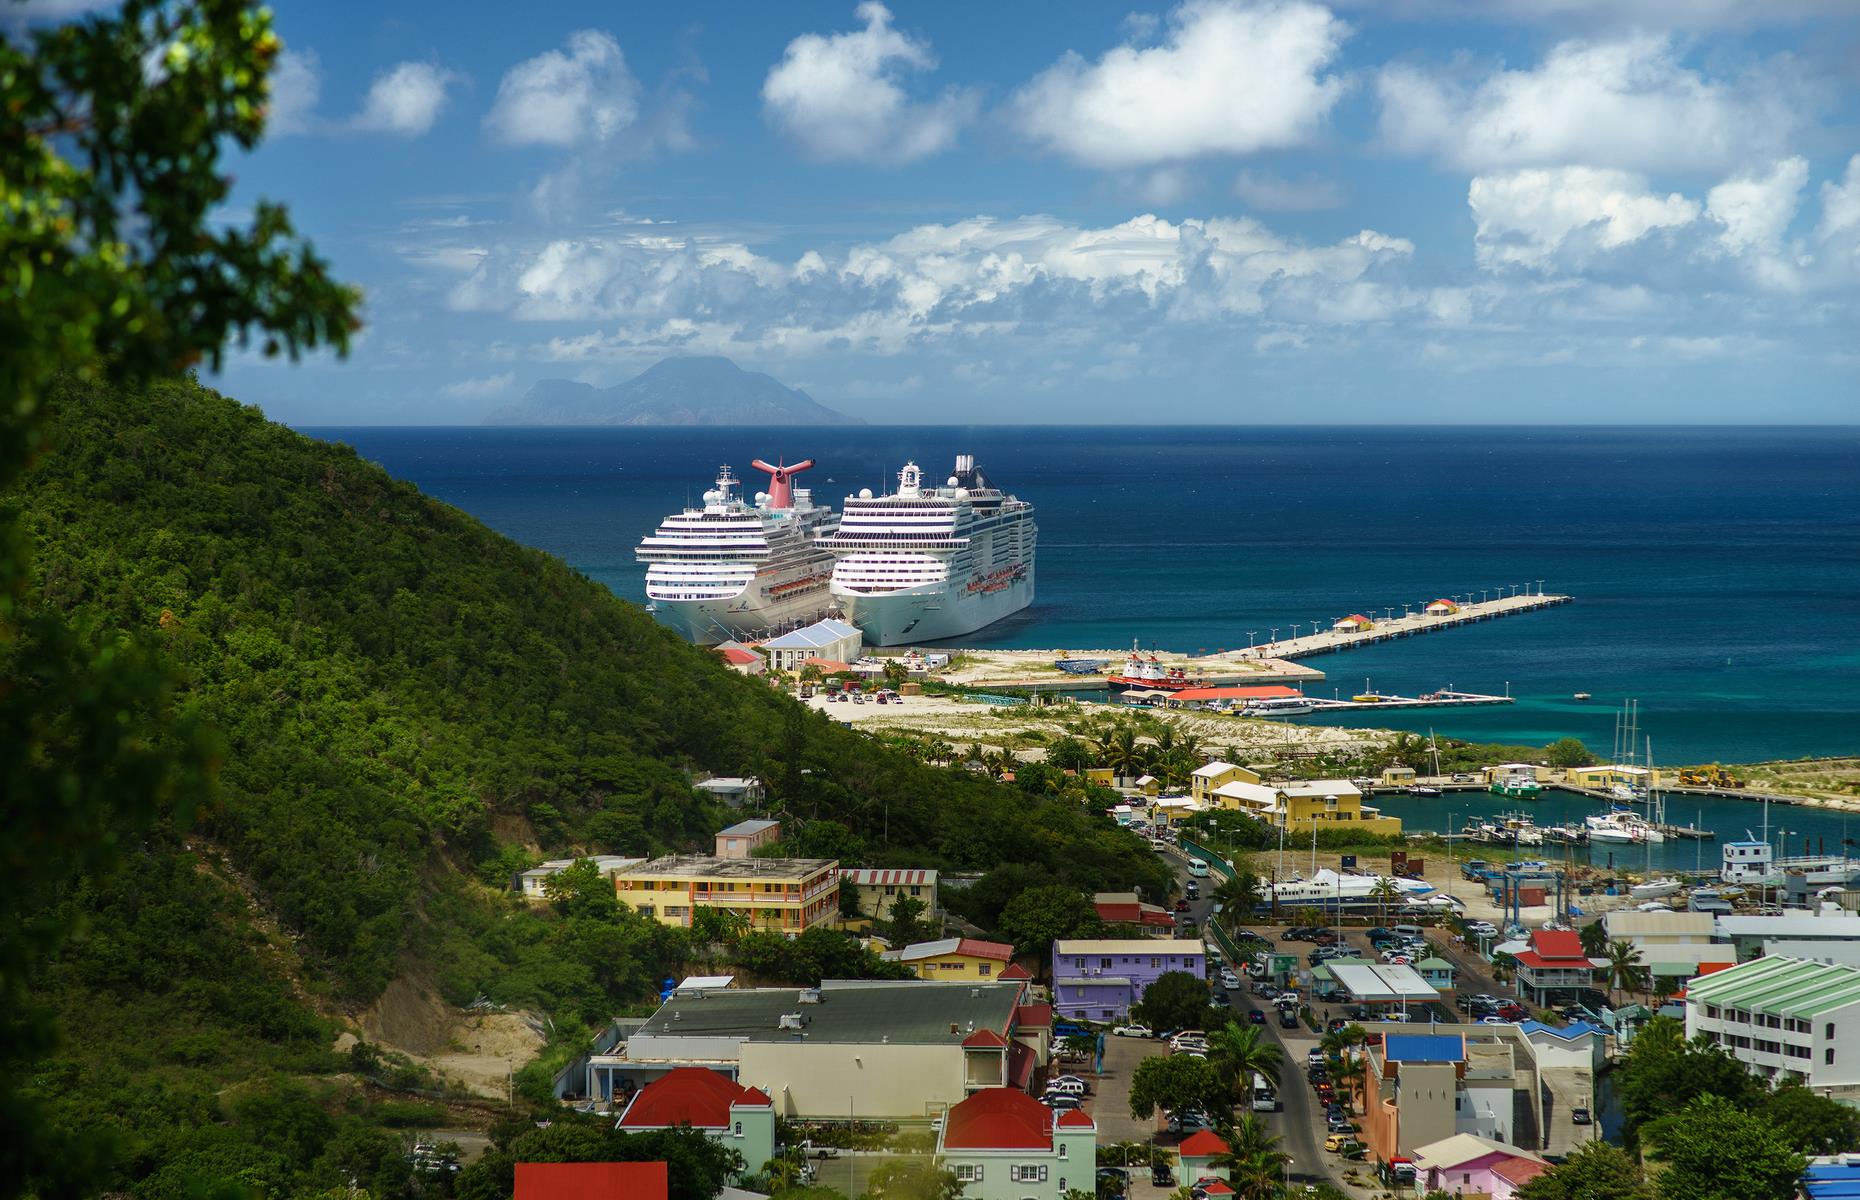 <p>Passengers are immediately welcomed to Harbour Point Village when they arrive ashore on the small island of St. Maarten, affectionately known as "the Friendly Island". The island’s colourful capital, Philipsburg, can be reached in 15 minutes on foot. This town has plenty of Dutch charm, great shopping in the form of duty-free outlets, souvenir shops and market stalls, as well as bars and restaurants. There are plenty of watersports available too. This beautiful island is visited by Carnival, Costa, Disney Cruise Line, Princess,  P&O, NCL and HAL, to name a few.</p>